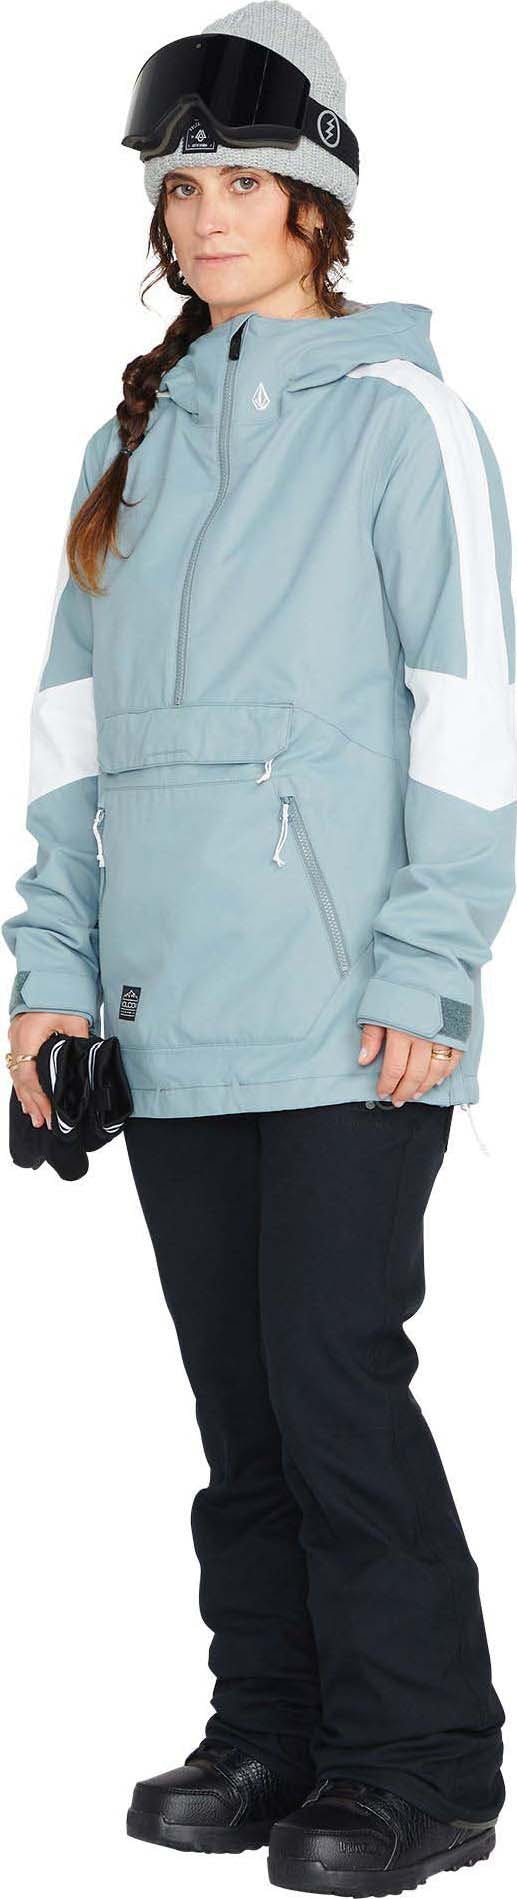 Product image for Mirror Pullover Jacket - Women's